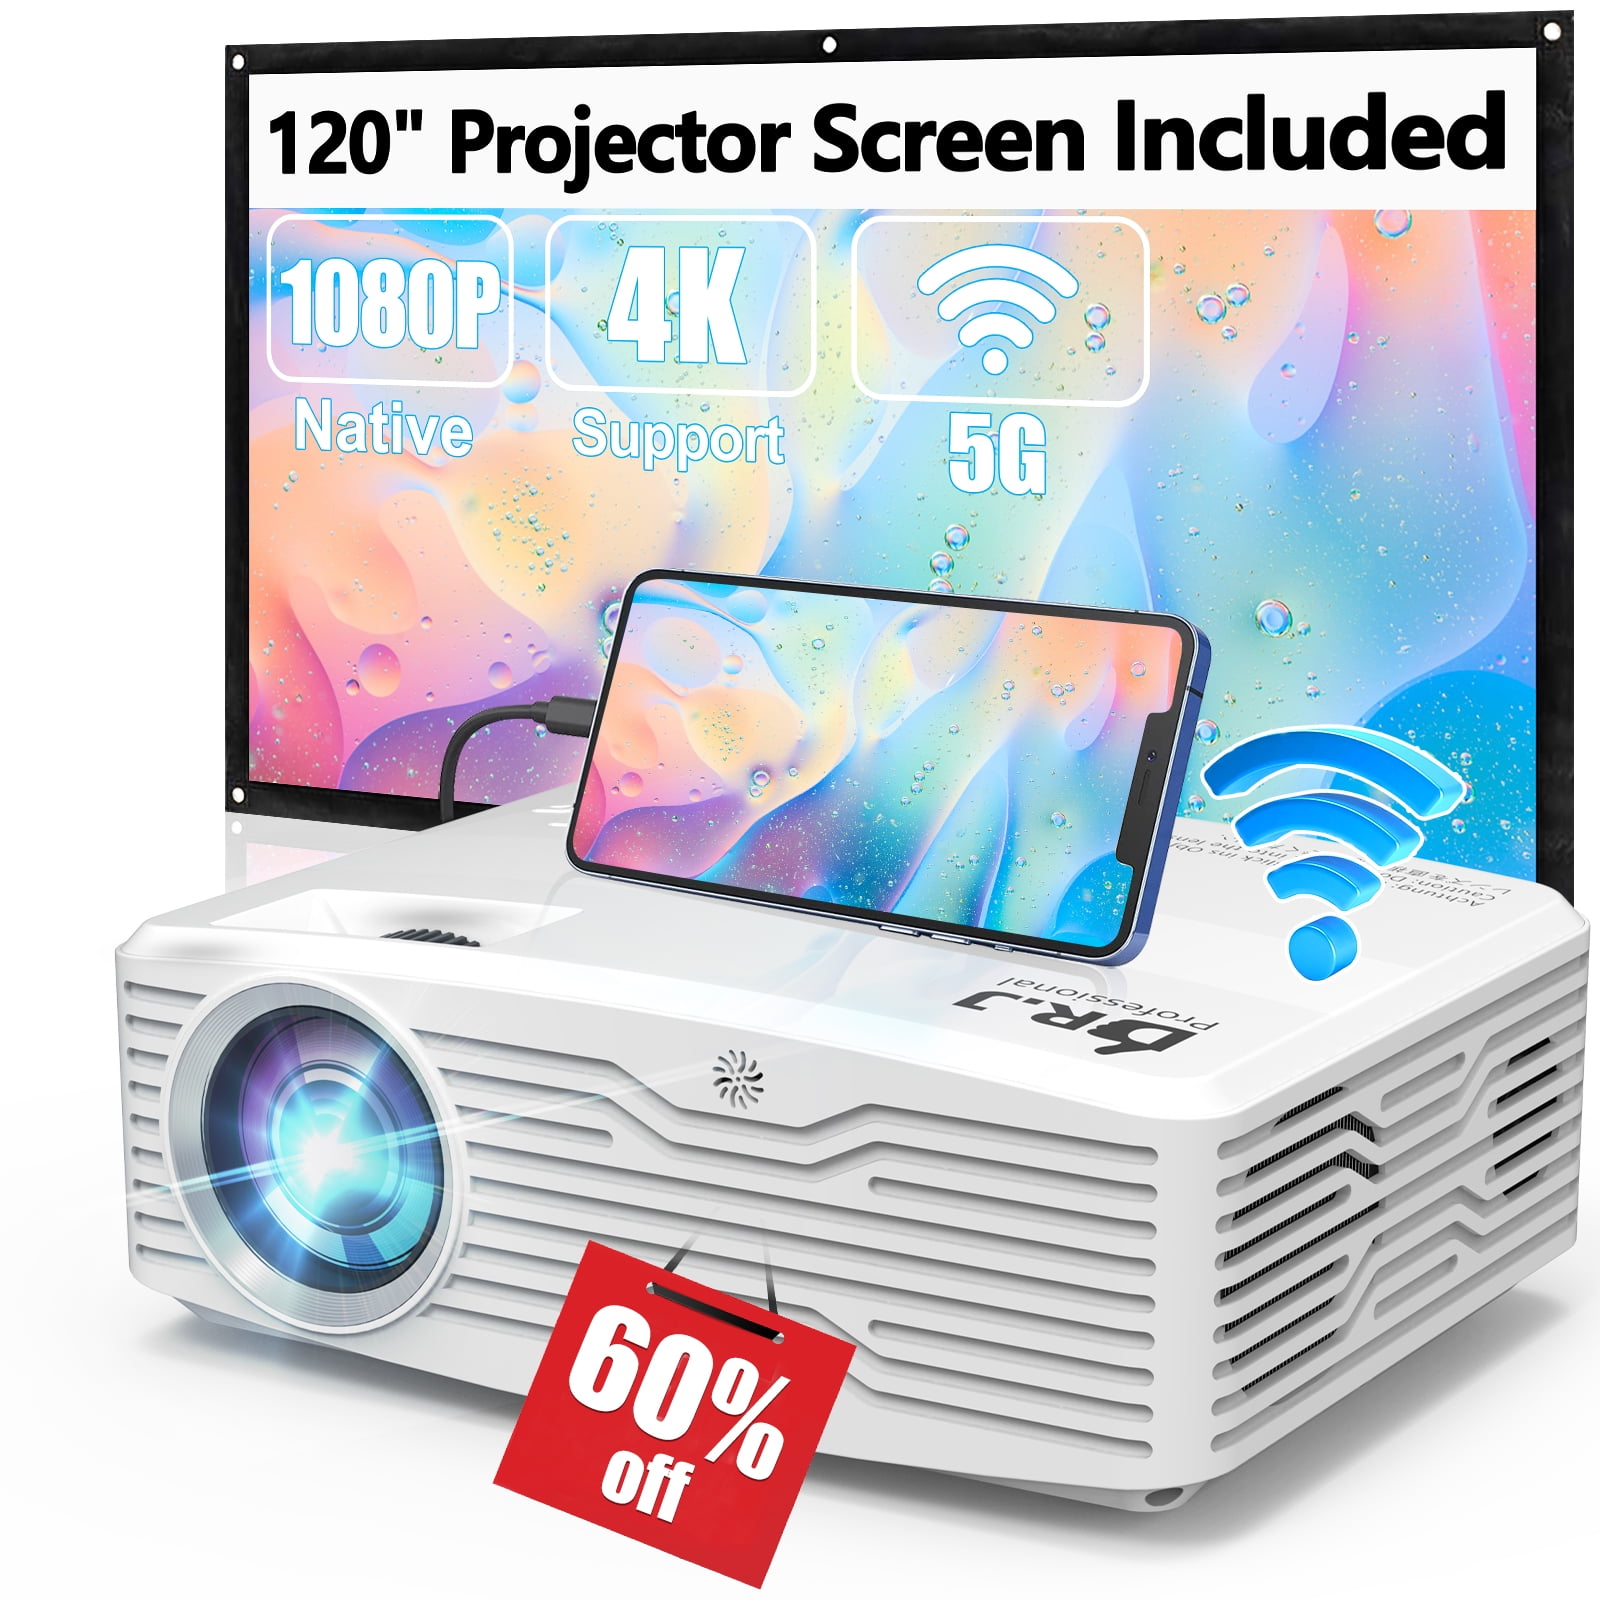 DR.J Professional 5G WiFi 300 DISPLAY Projector Full HD, 4K Native 1080P  9500Lumens Projector, 120 Projector Screen Included 